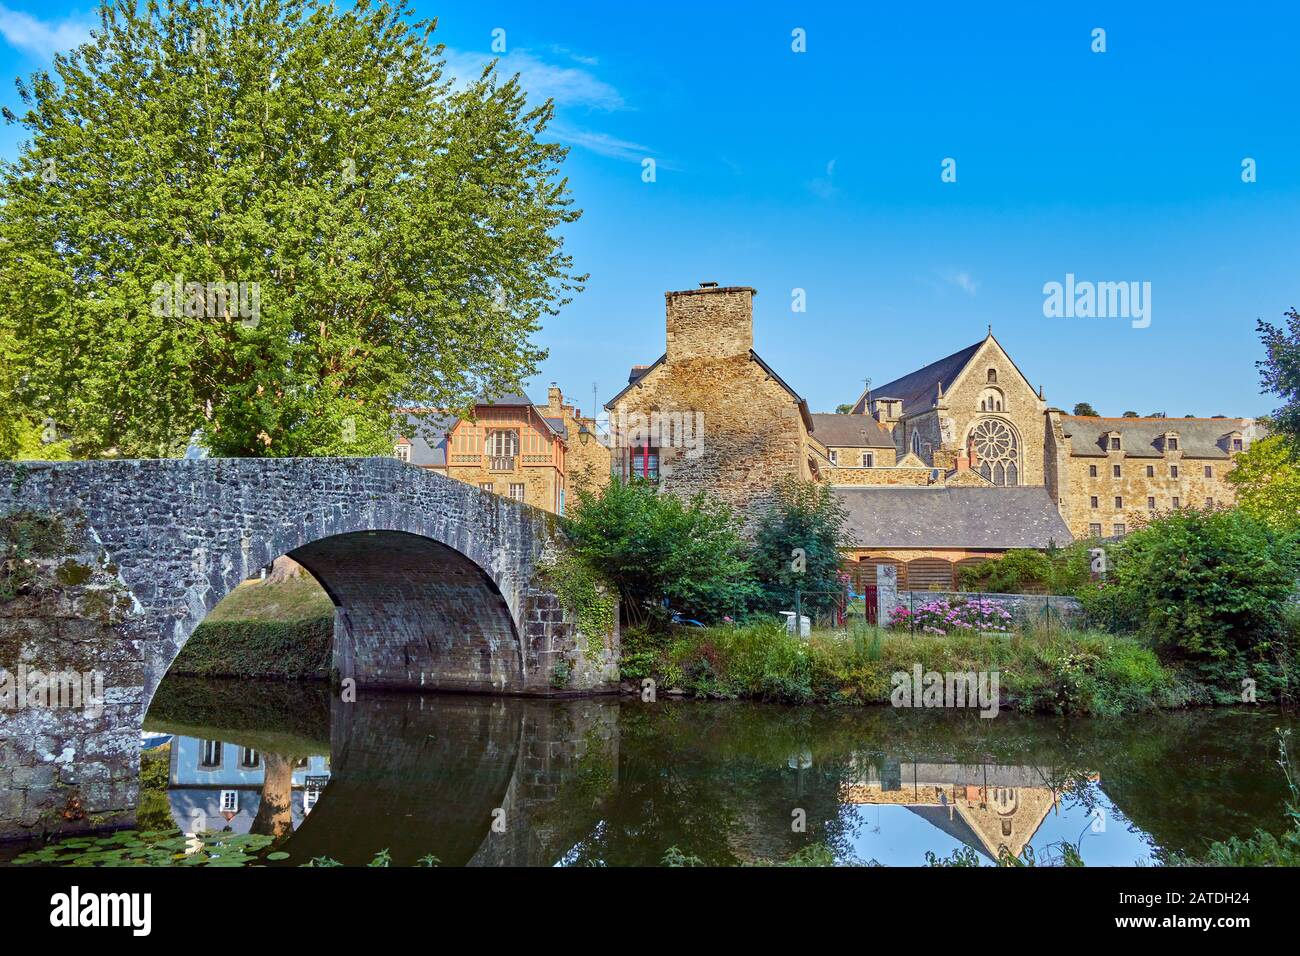 Image of the stone bridge ove the Canal d'ille du Rance at Lehon, Brittany, France Stock Photo